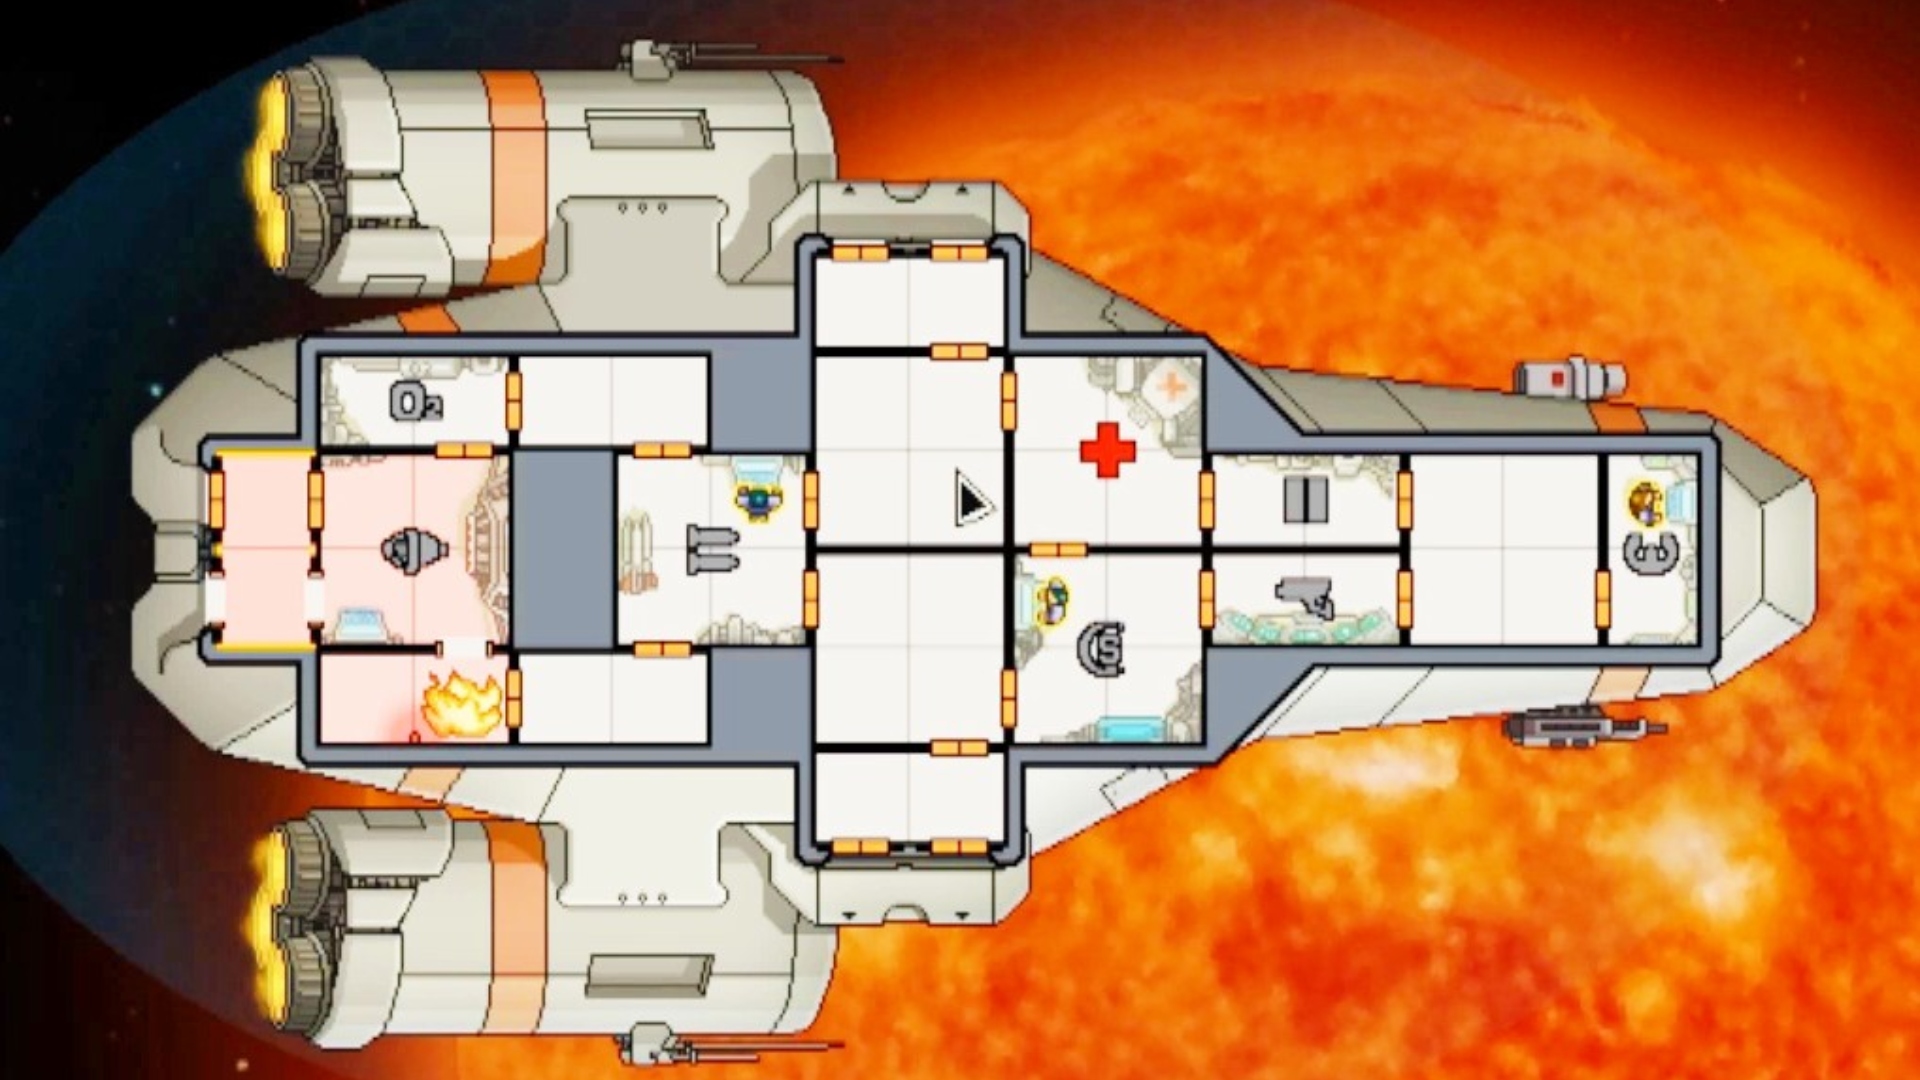 12 years later, classic roguelike FTL has a huge unofficial expansion